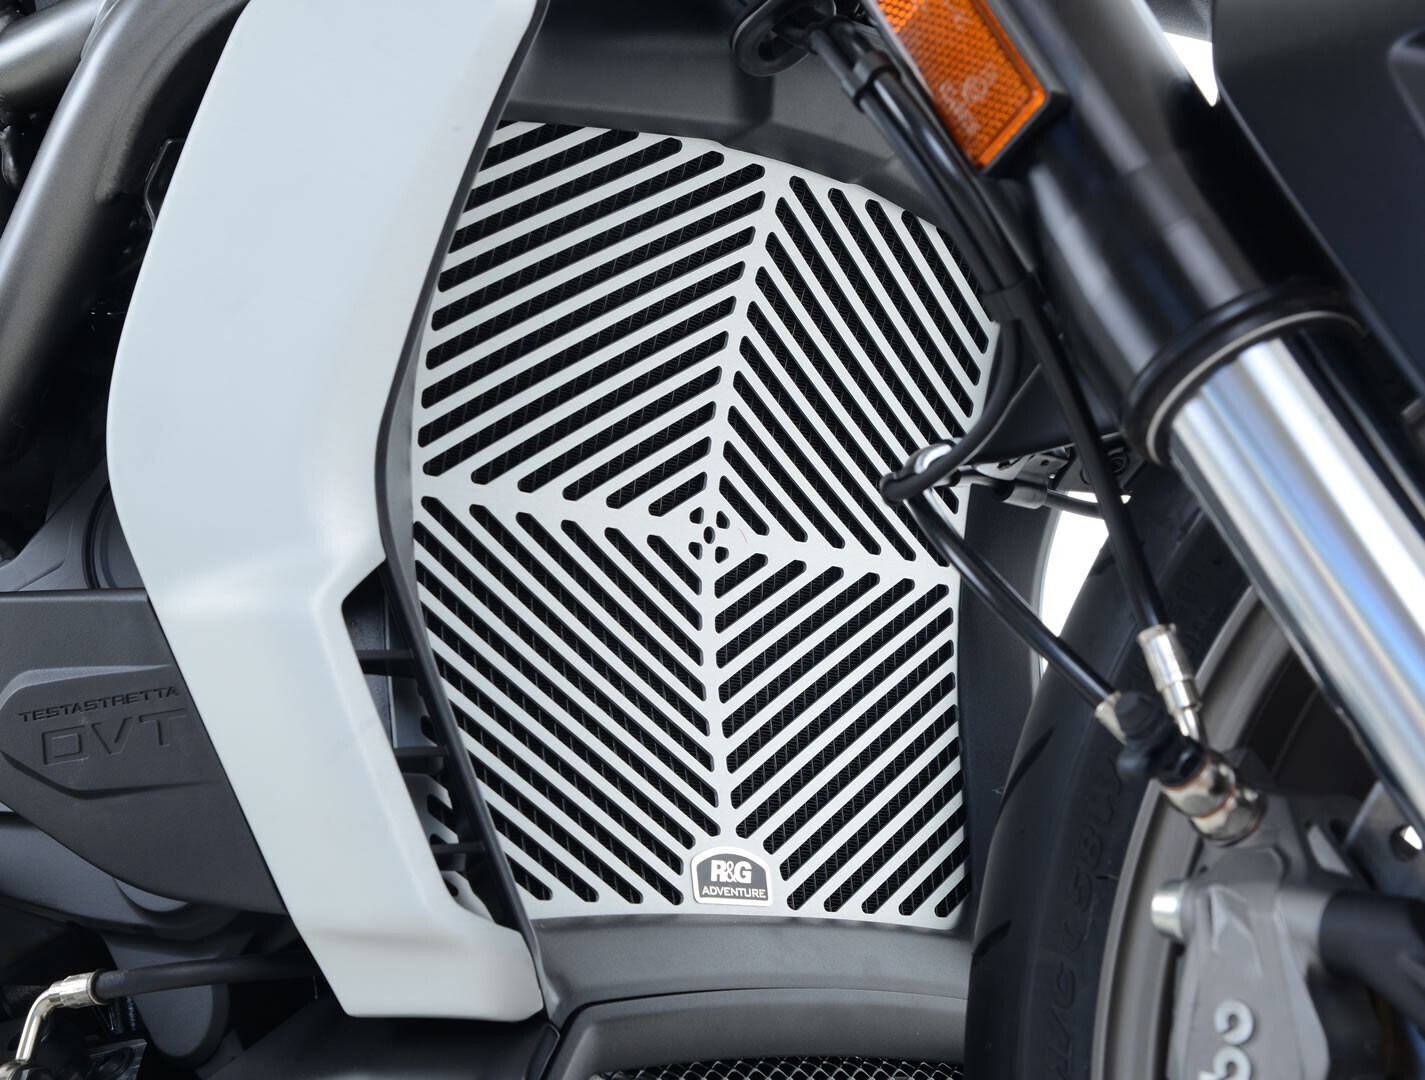 R&G Radiator Guard DUC Xdiavel/S (COLOUR:SILVER) Product main image